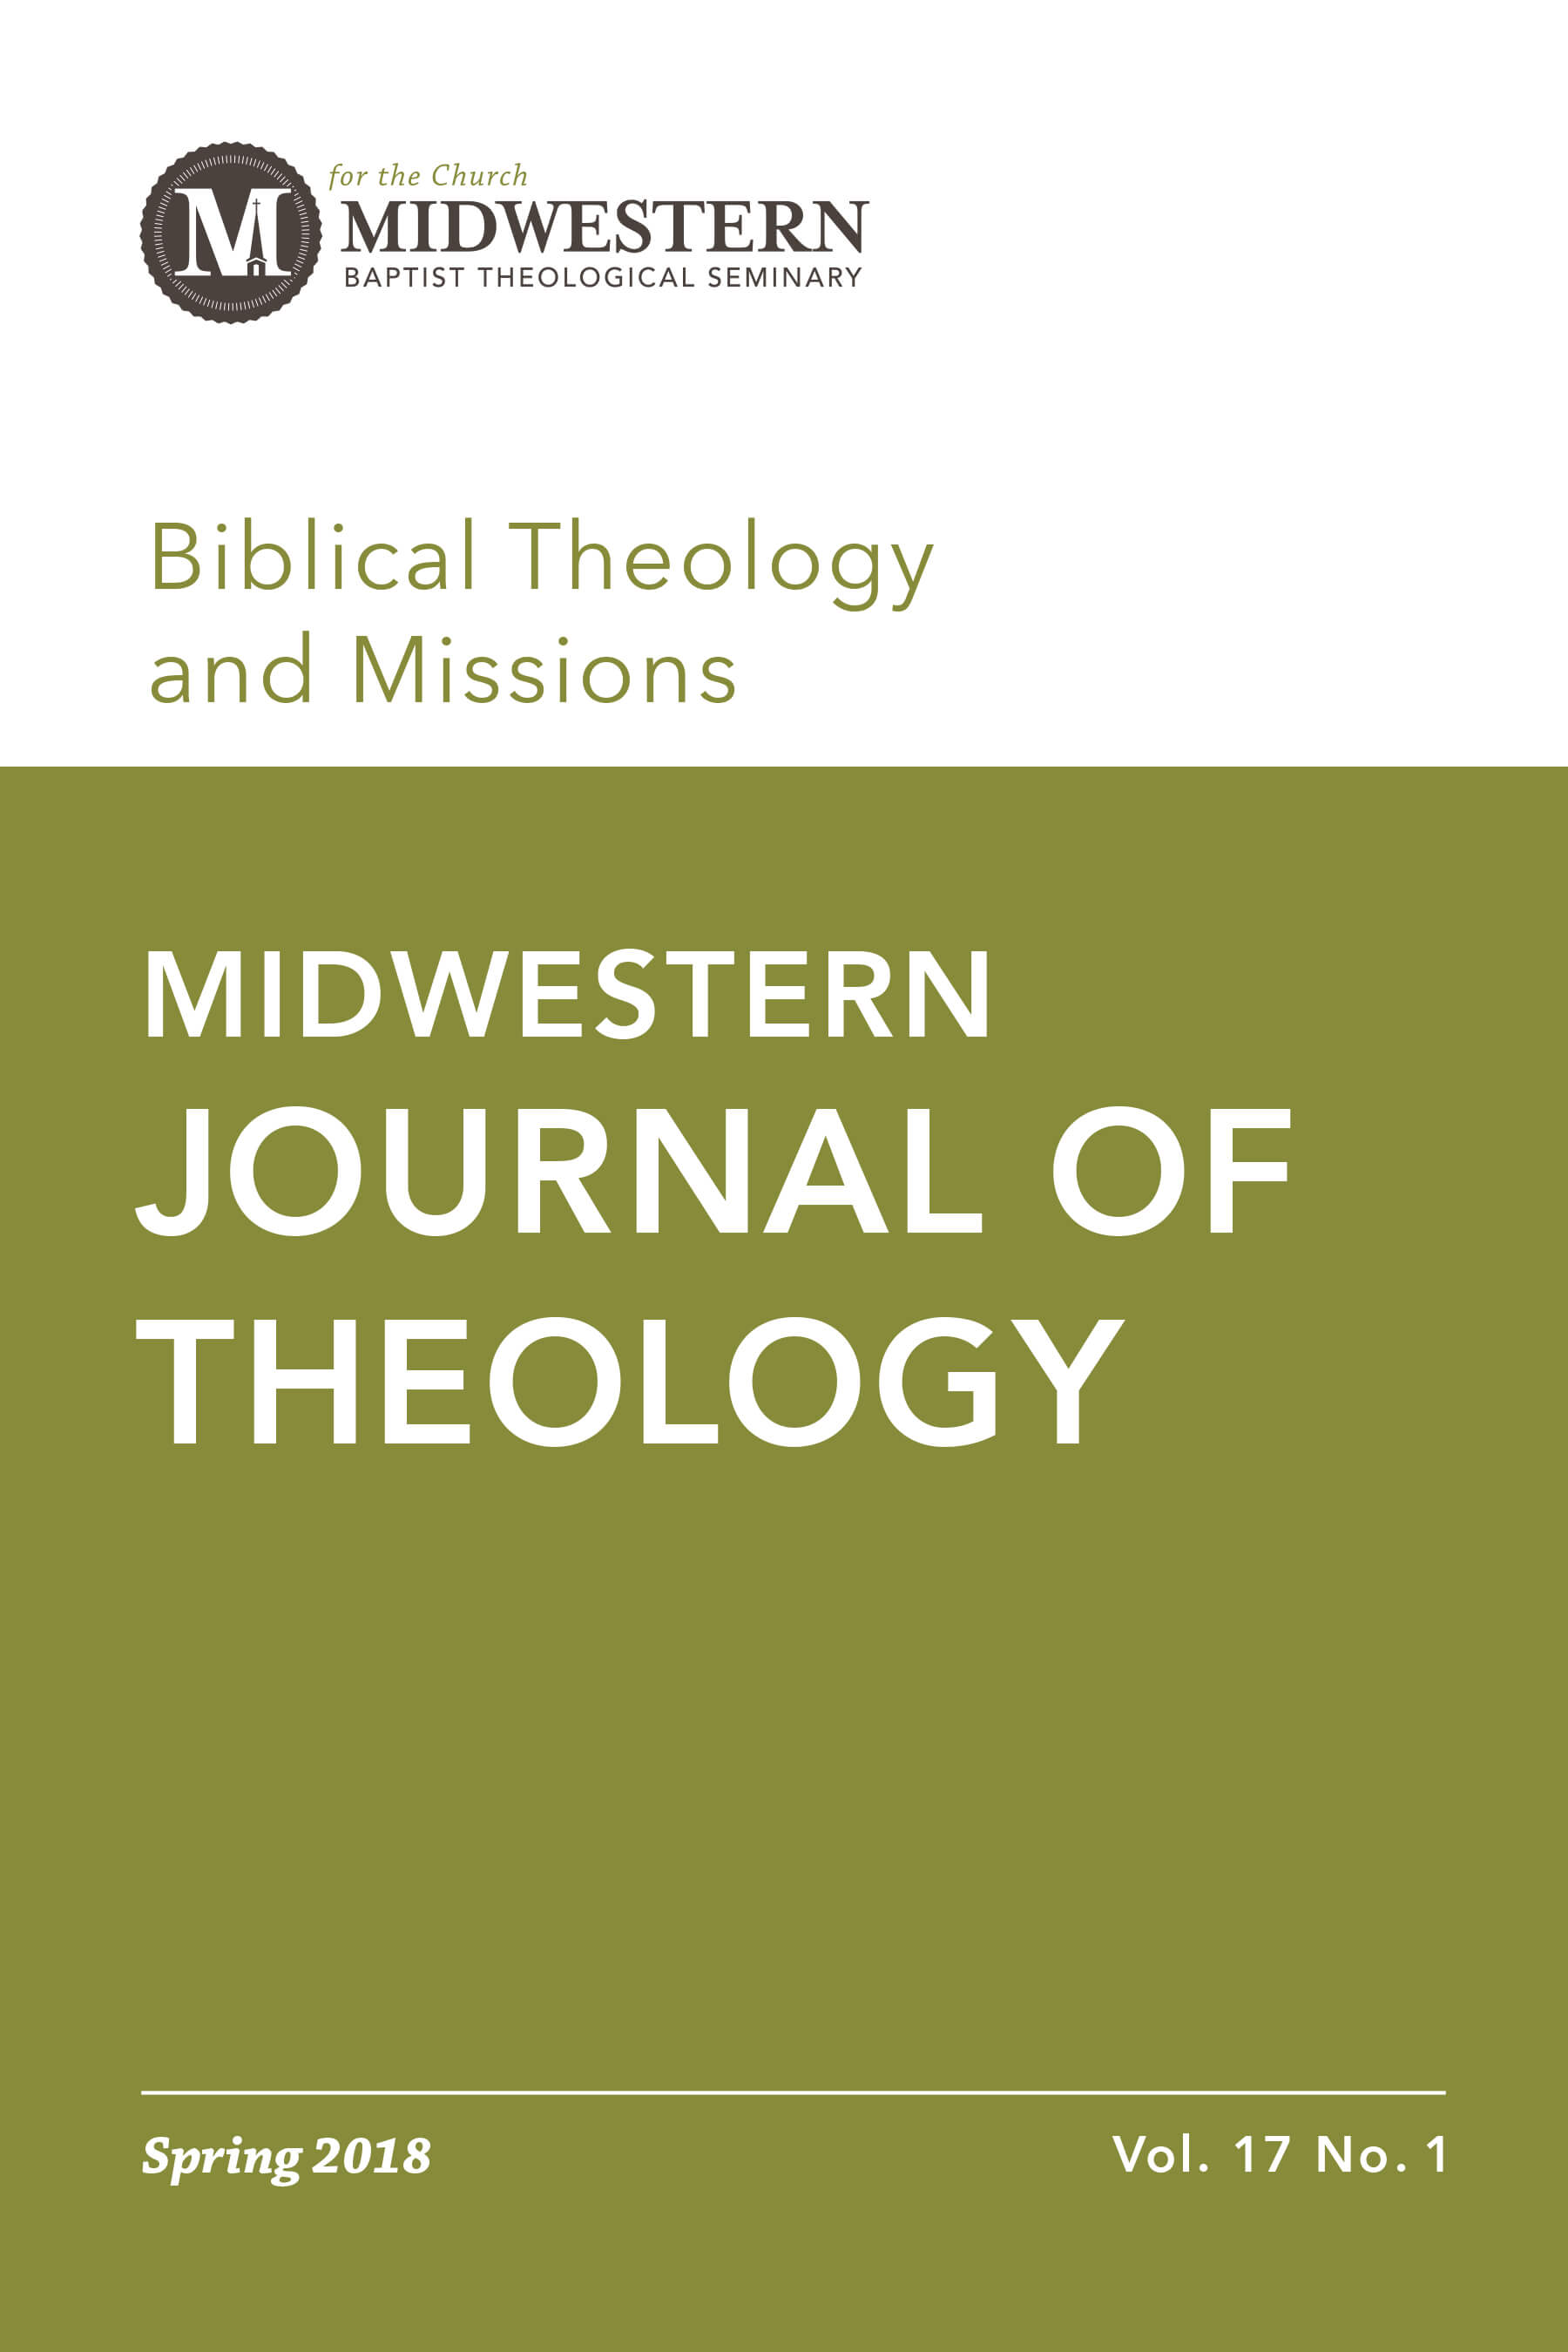 Spring 2018 Midwestern Journal of Theology